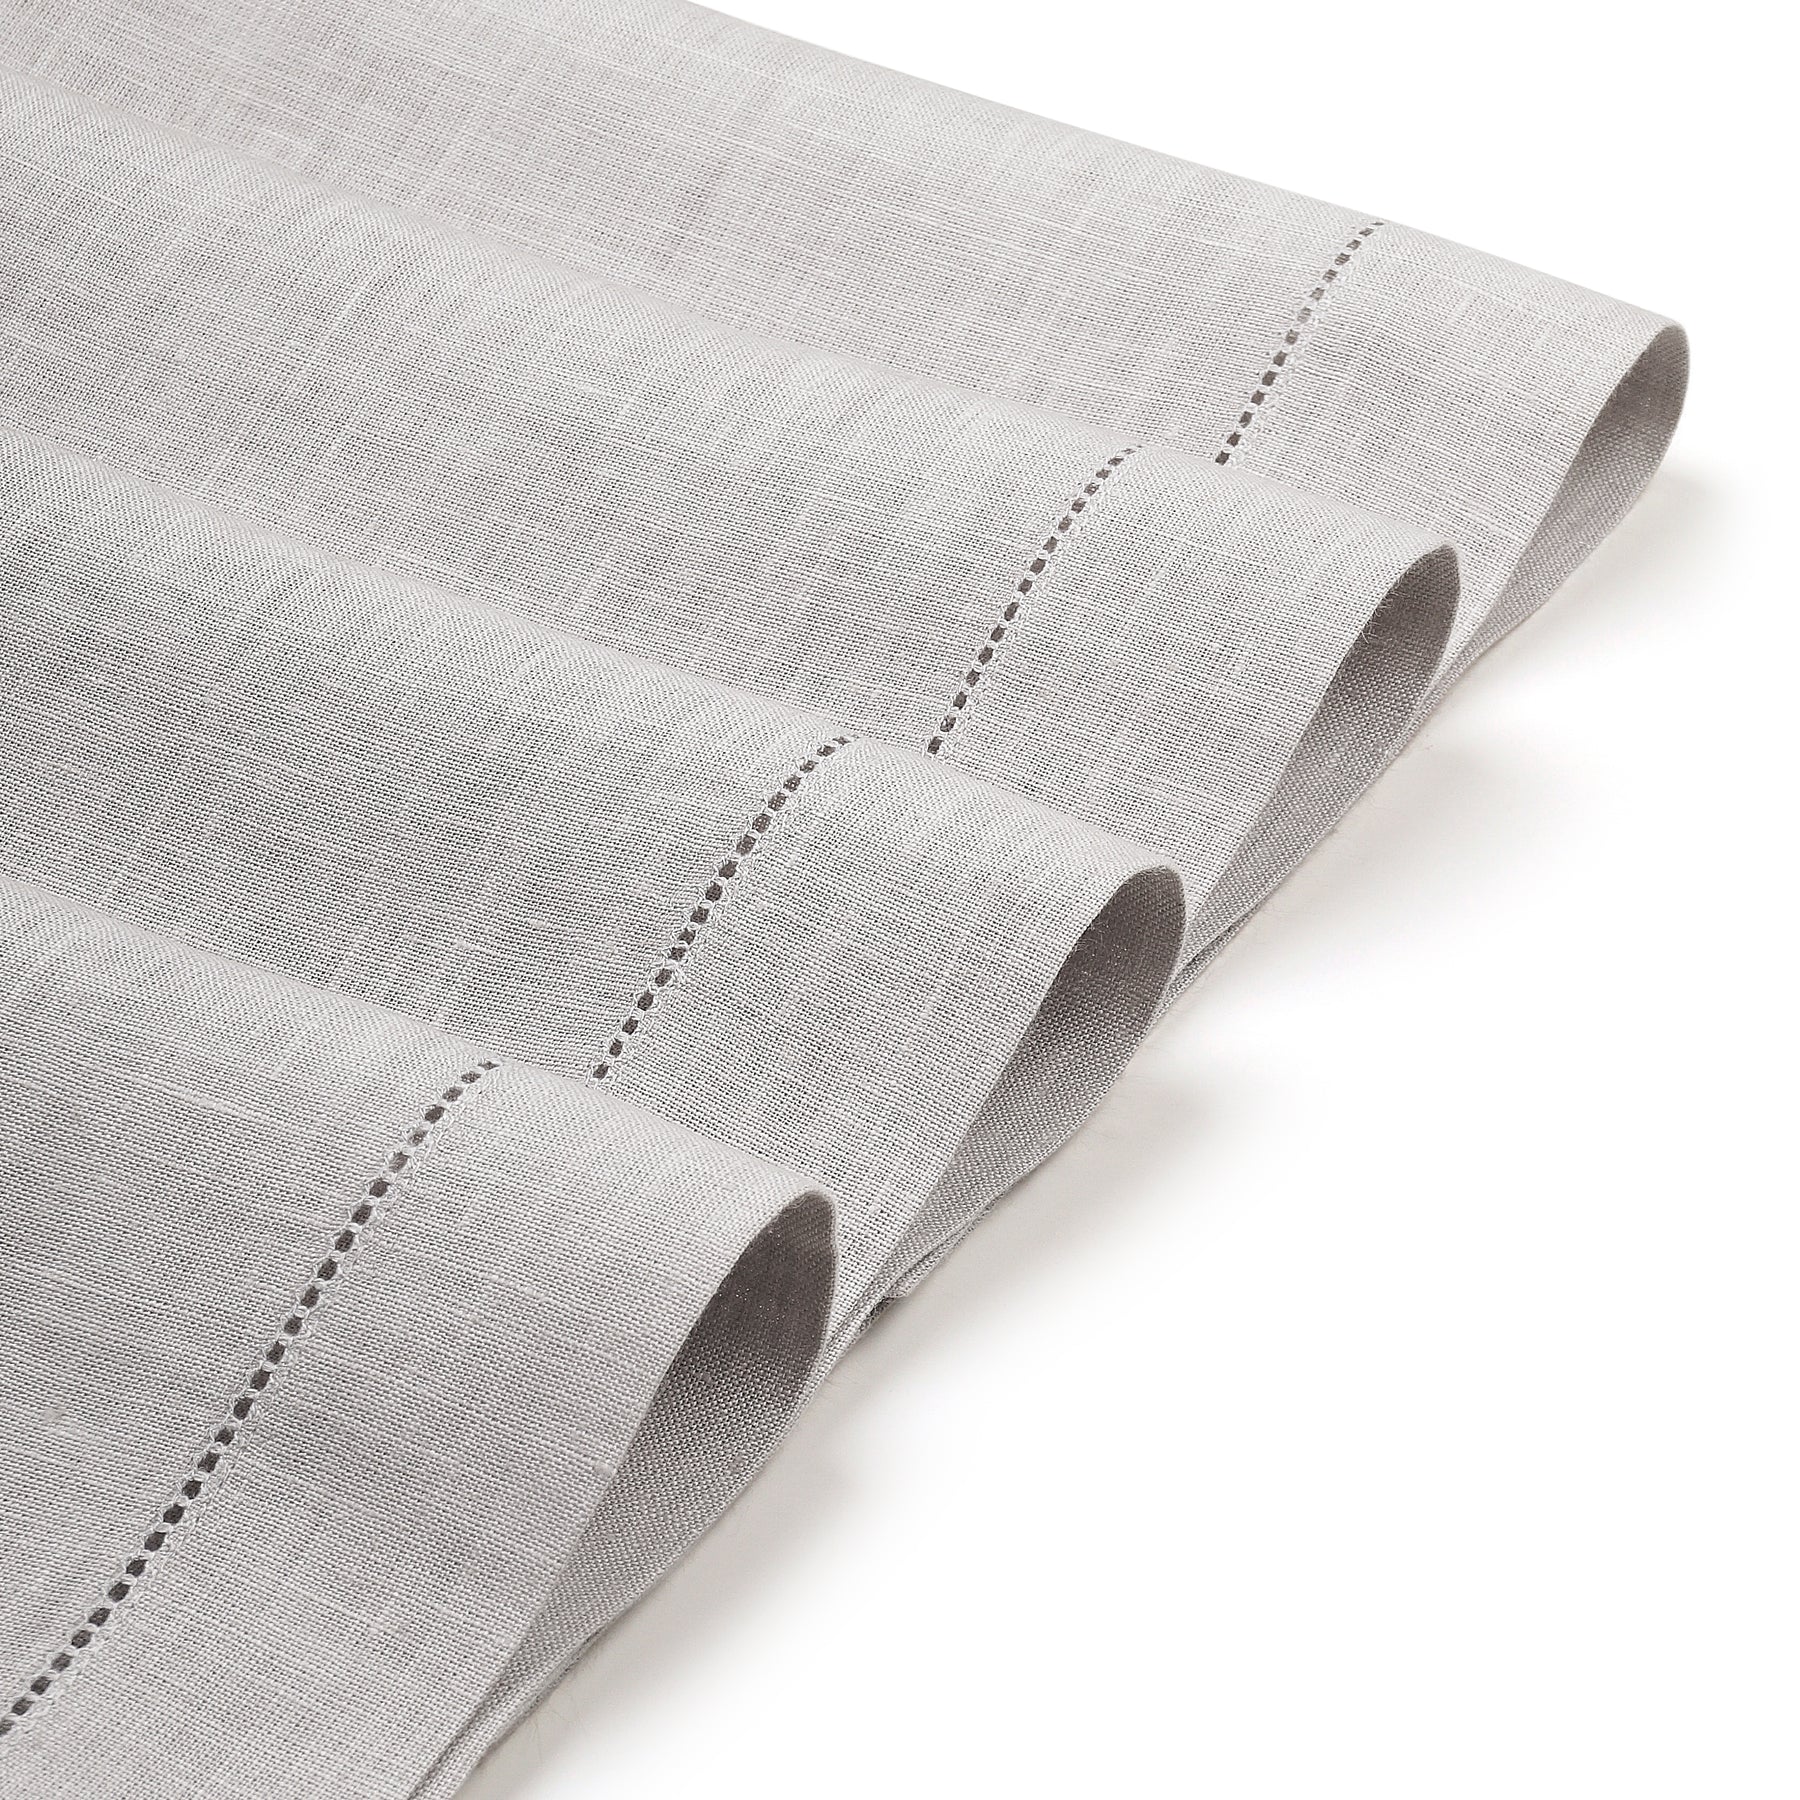 Silver Grey Linen Placemats 14 x 19 Inch Set of 4 - Hemstitch